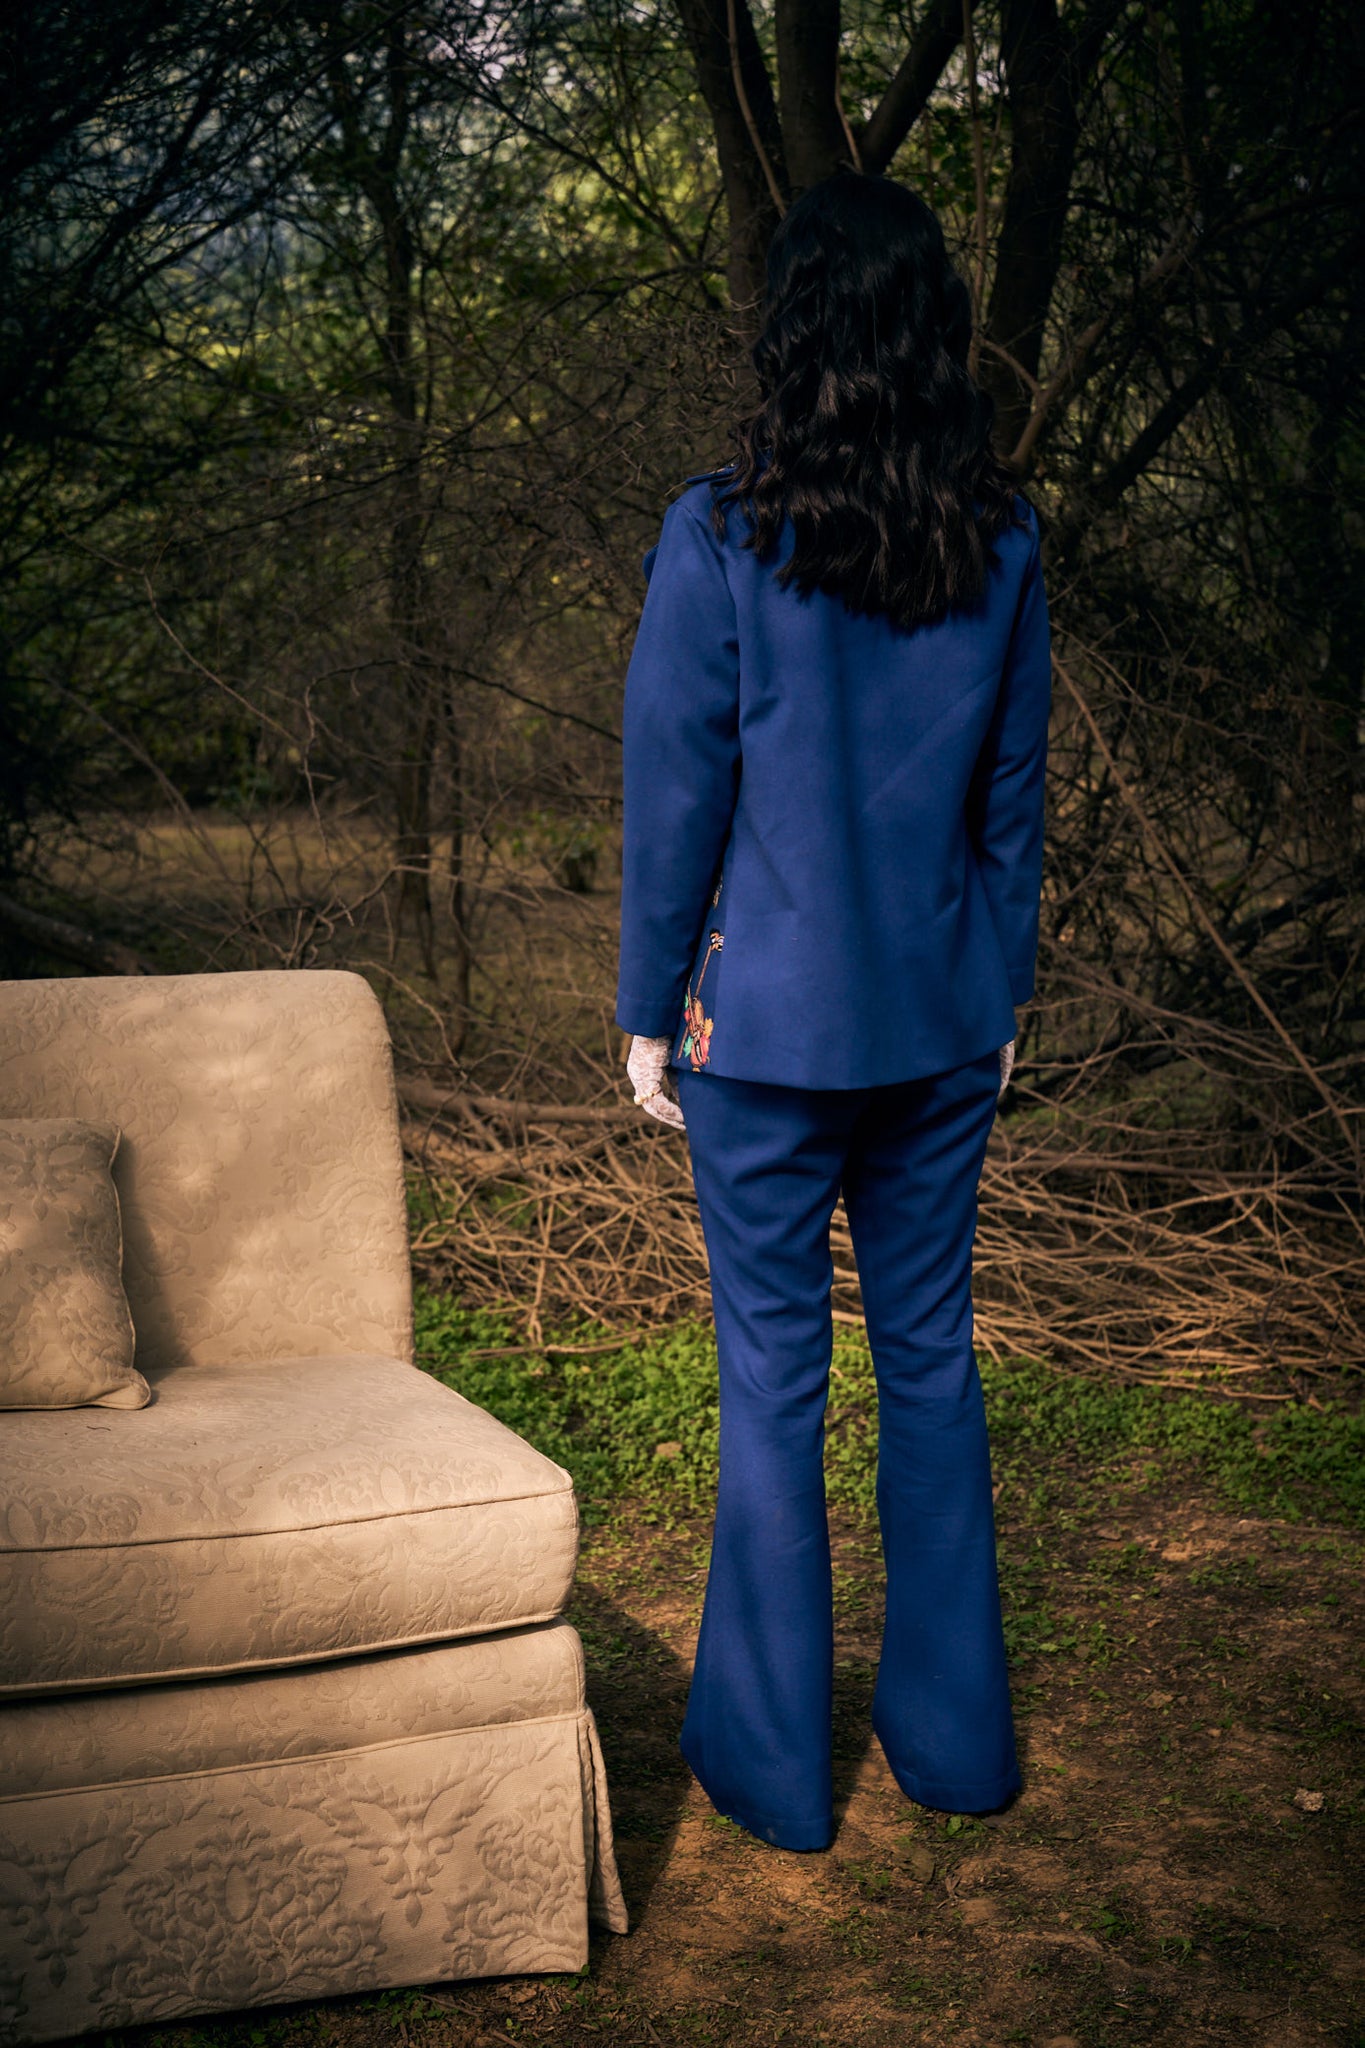 Blue Embroidered Jacket With Pants